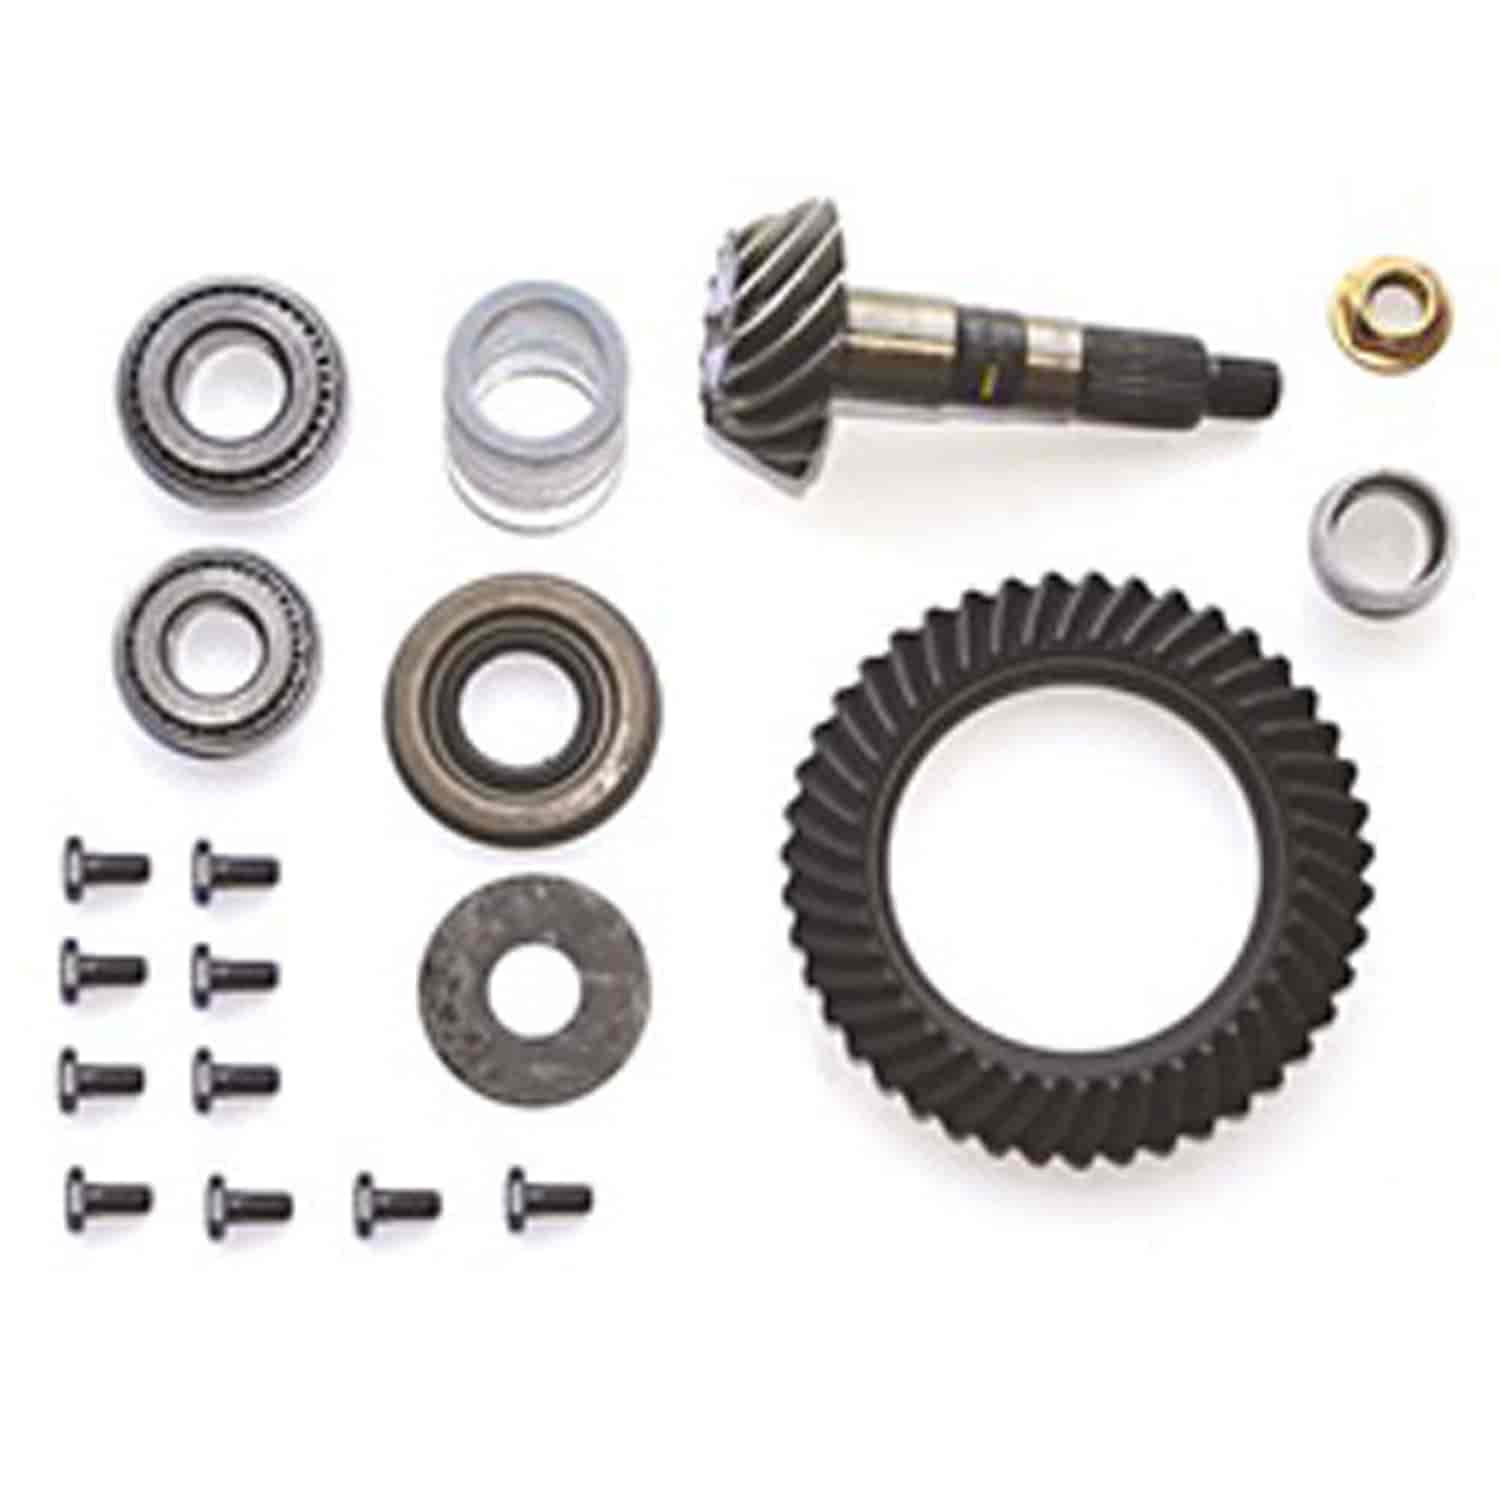 Ring and Pinion Kit for Dana 30 4.10